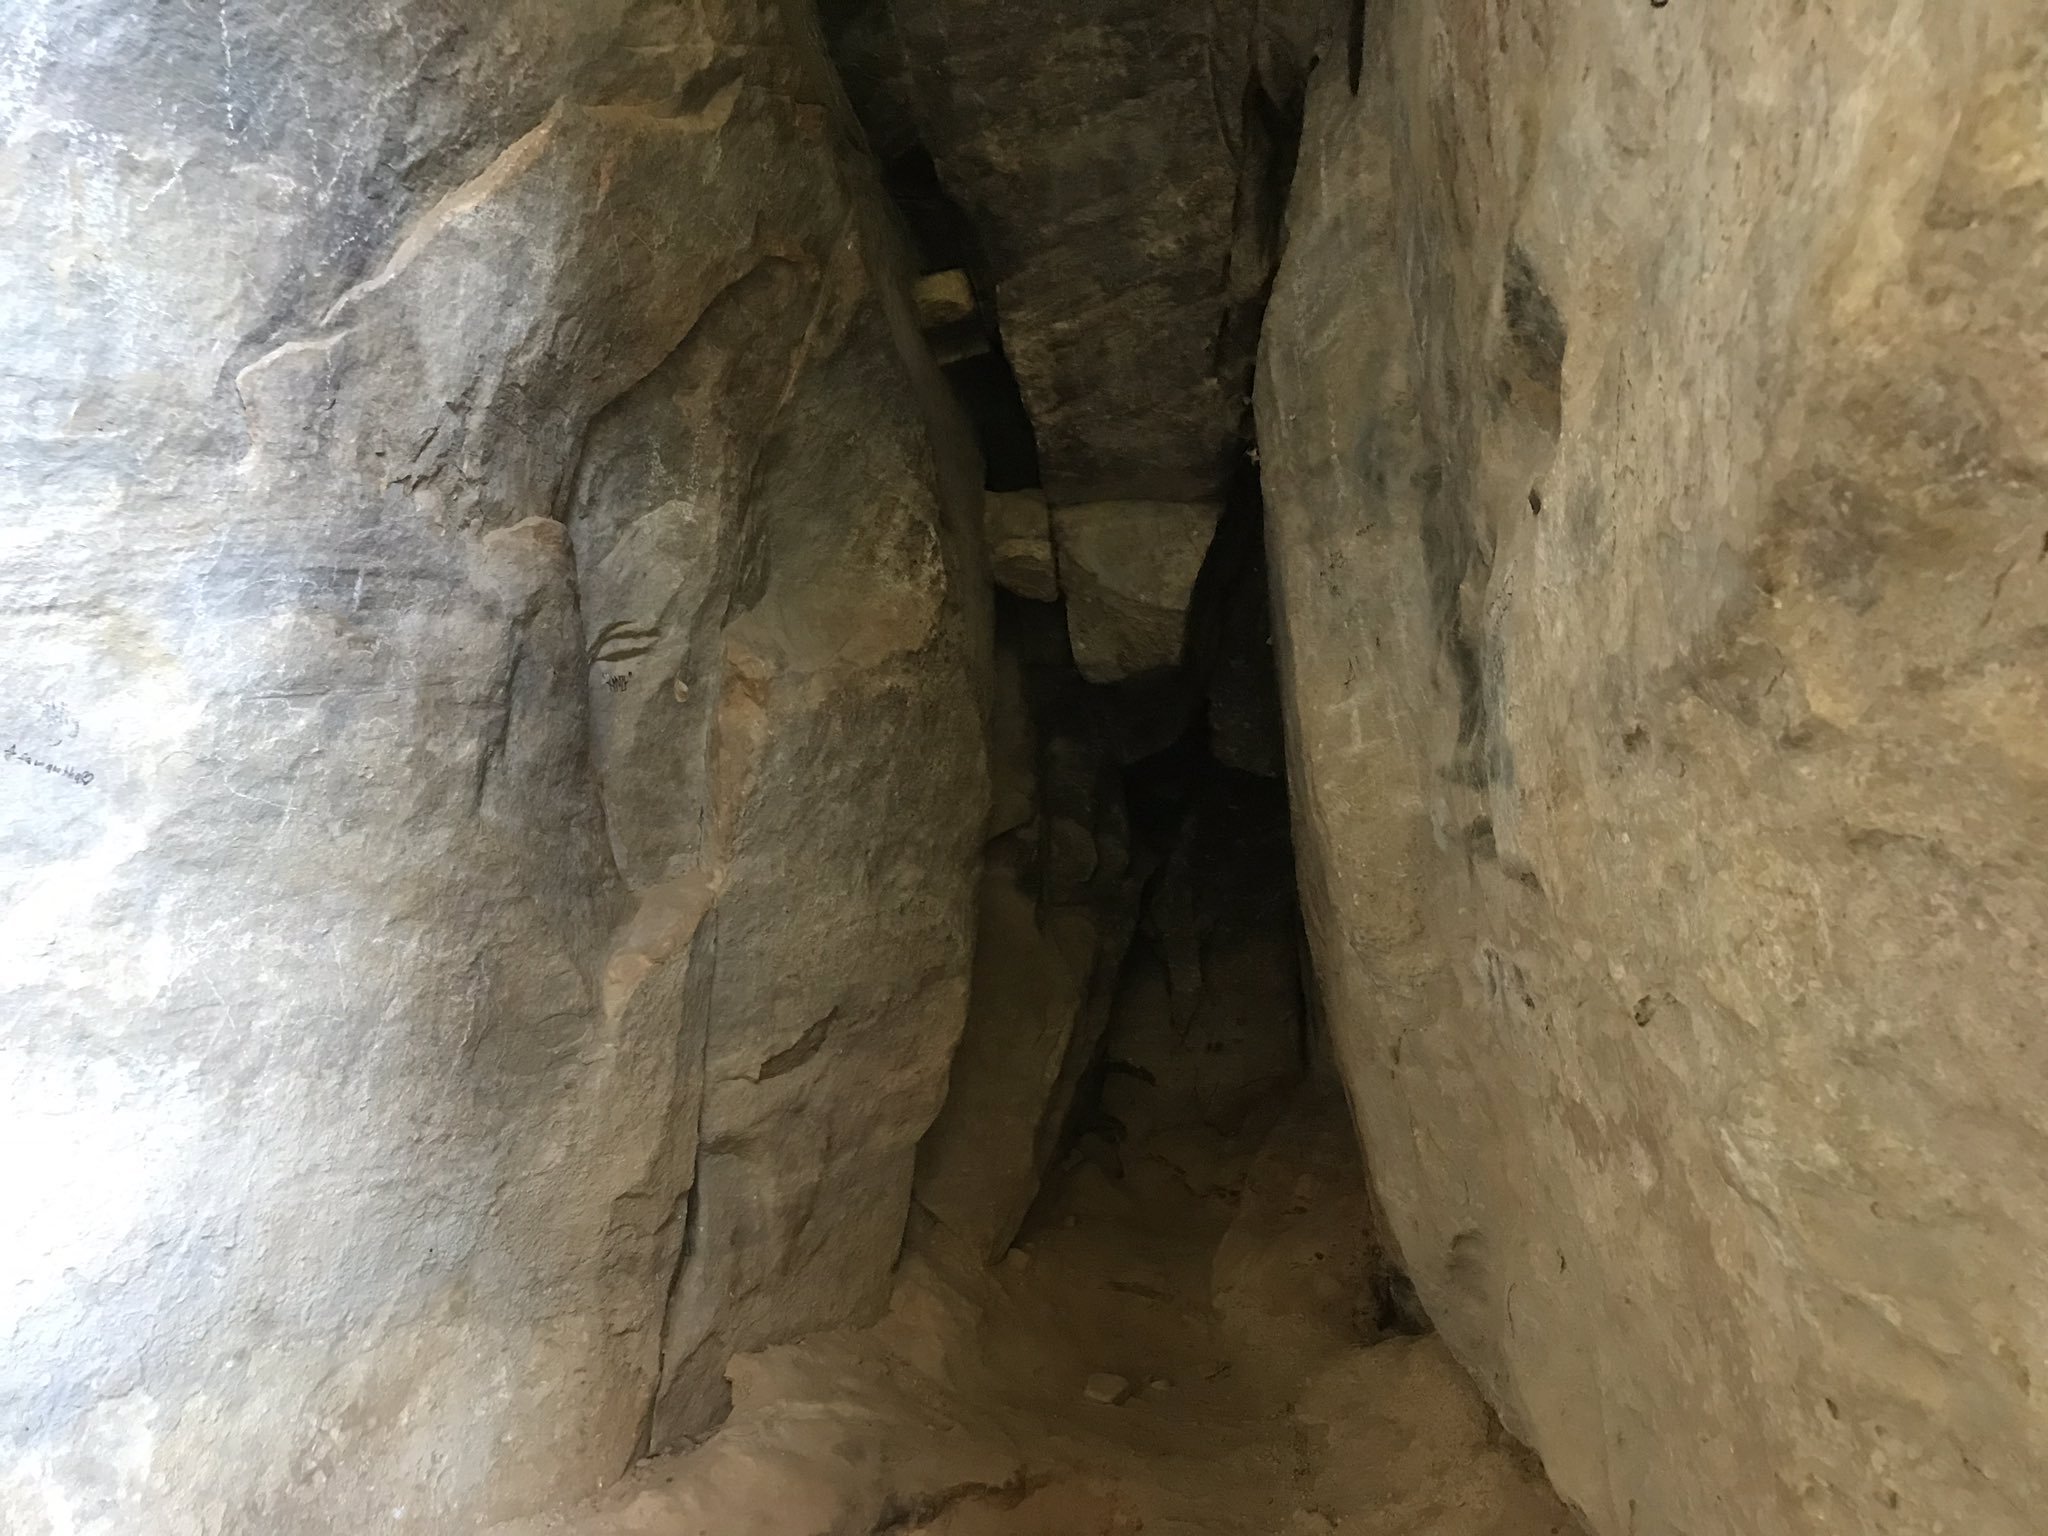 Photo of a cave entrance going into darkness